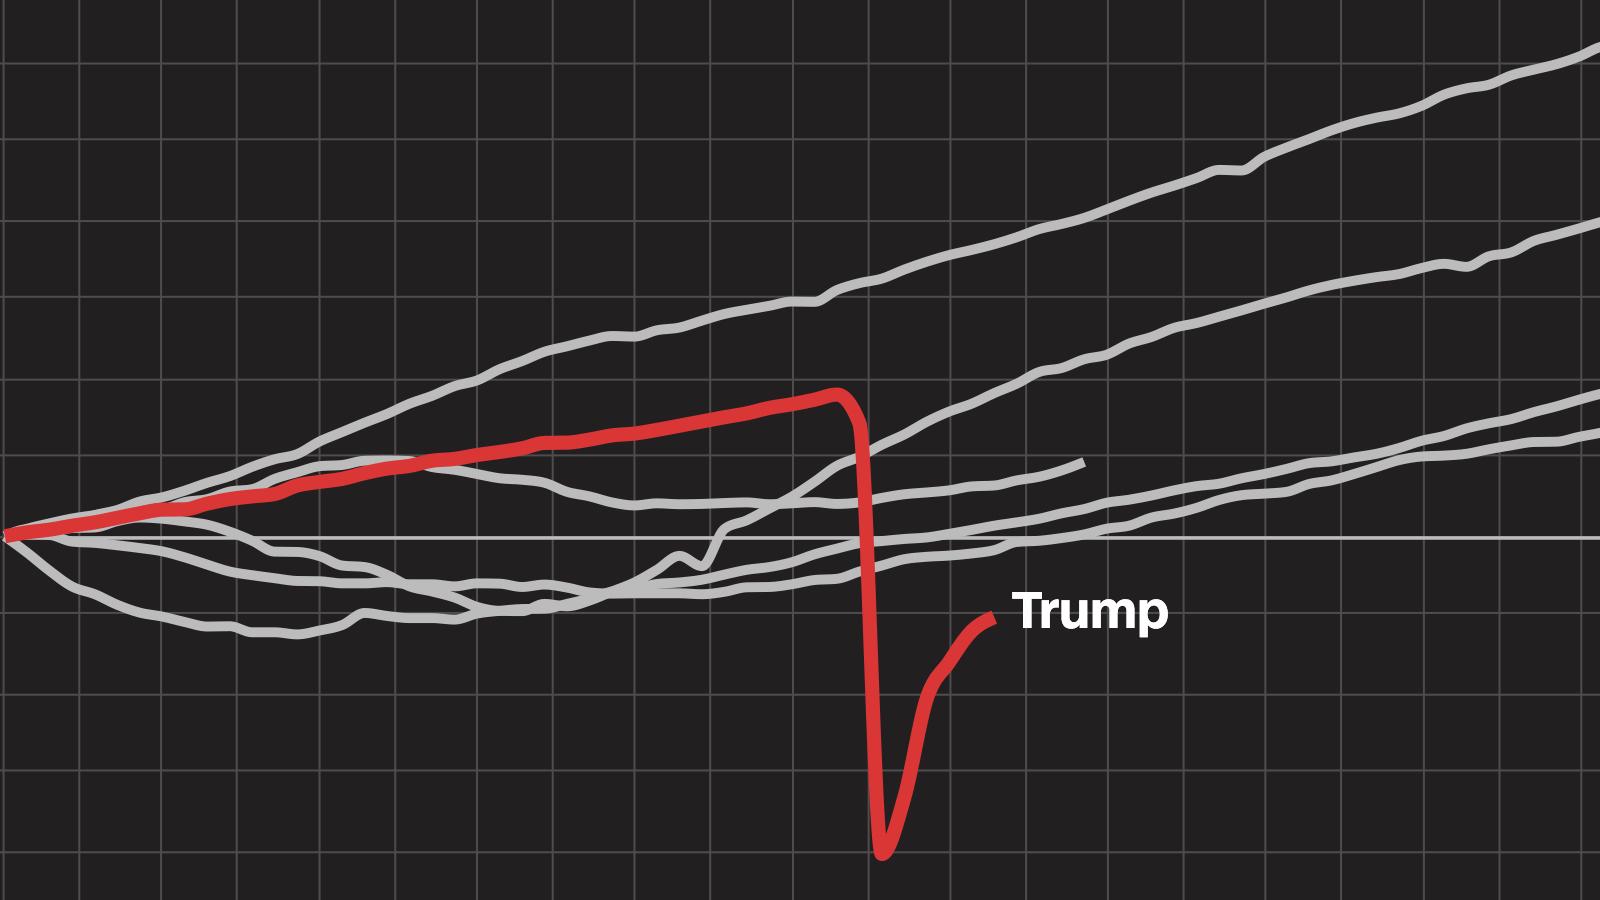 How the Trump economy compares to economies under other presidents